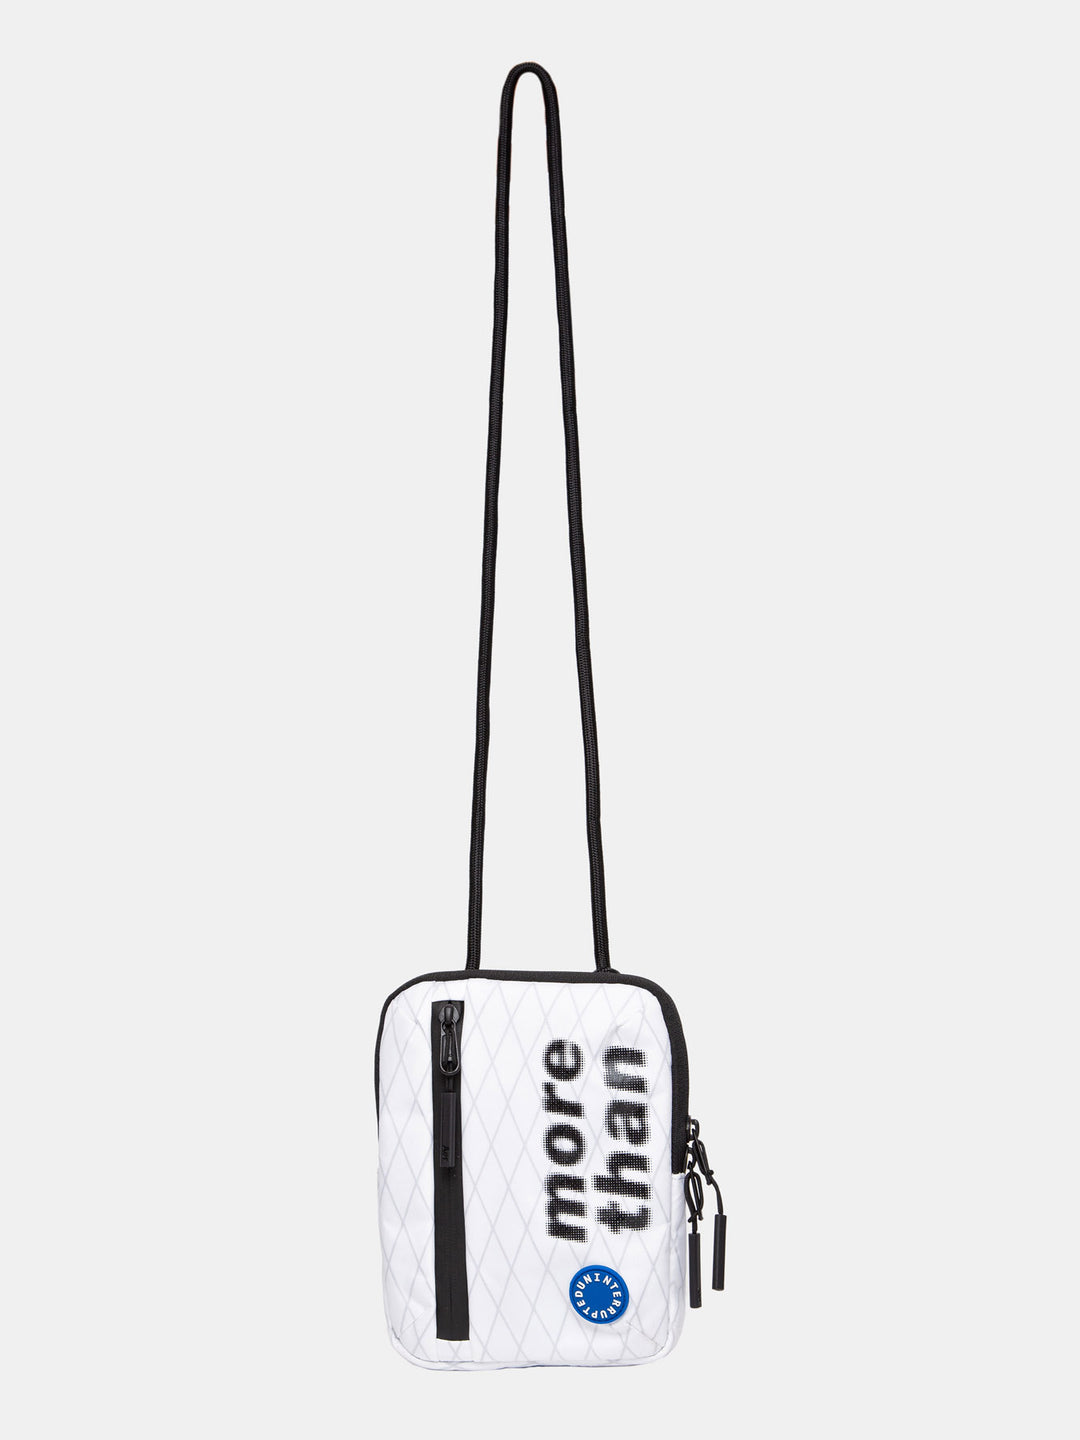 front view of the bag with long strap